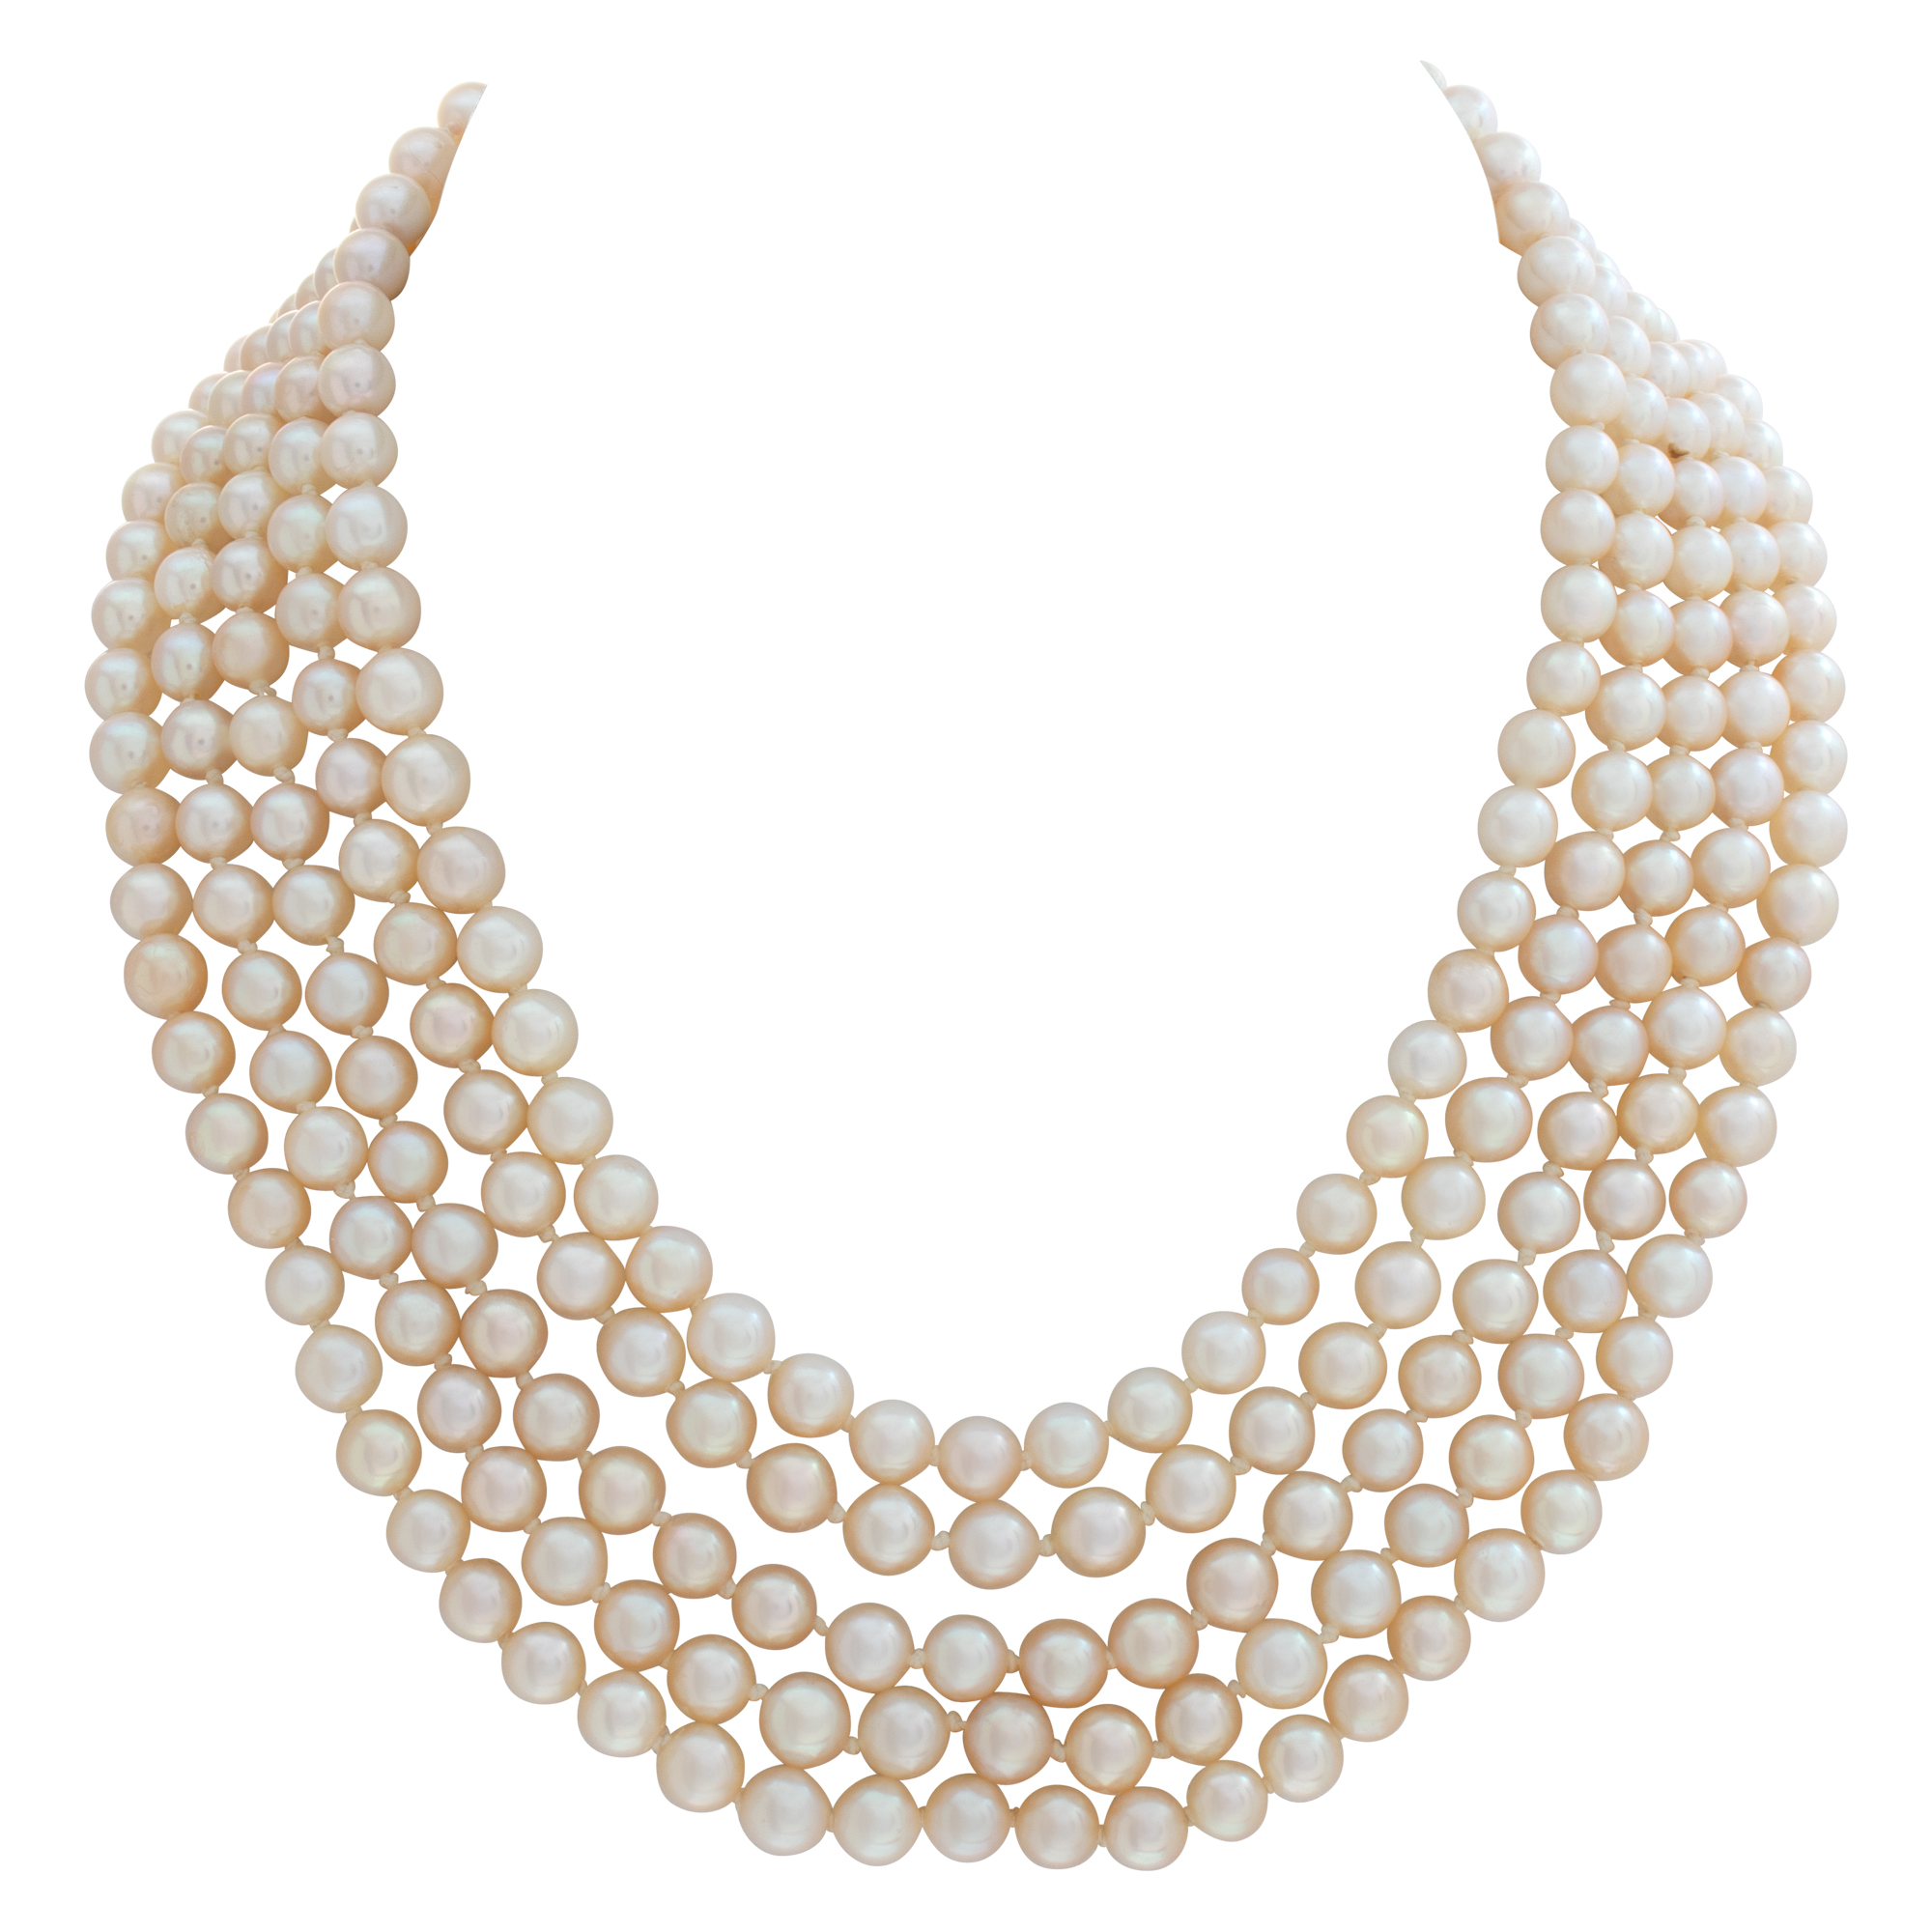 AKOYA pearls 5 x 6 mm, five graduating strand necklace. Strands graduated from 14 inches to 17 inches length image 1